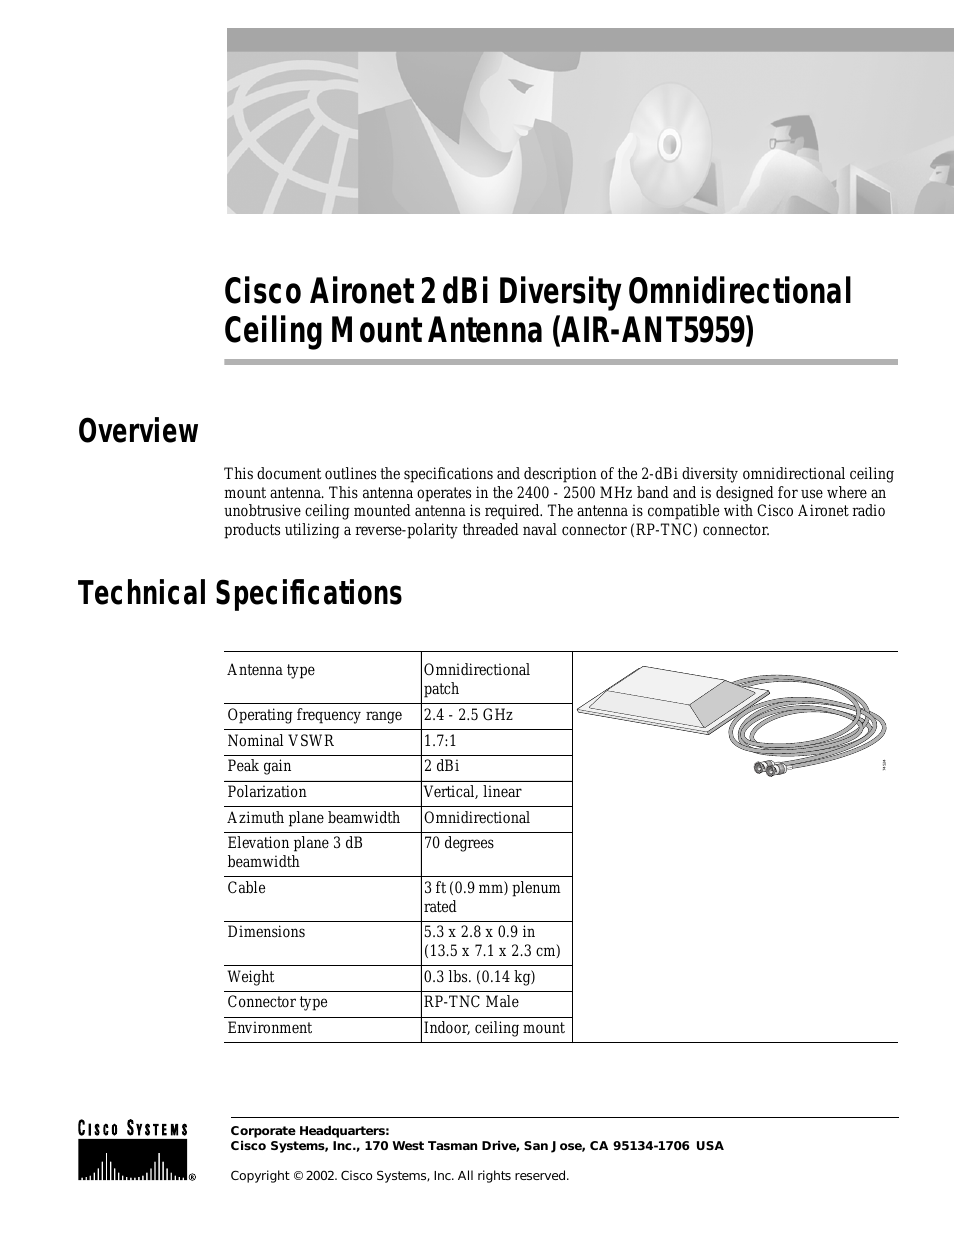 Aironet 2 dBi Diversity Omnidirectional Ceiling Mount Antenna AIR-ANT5959